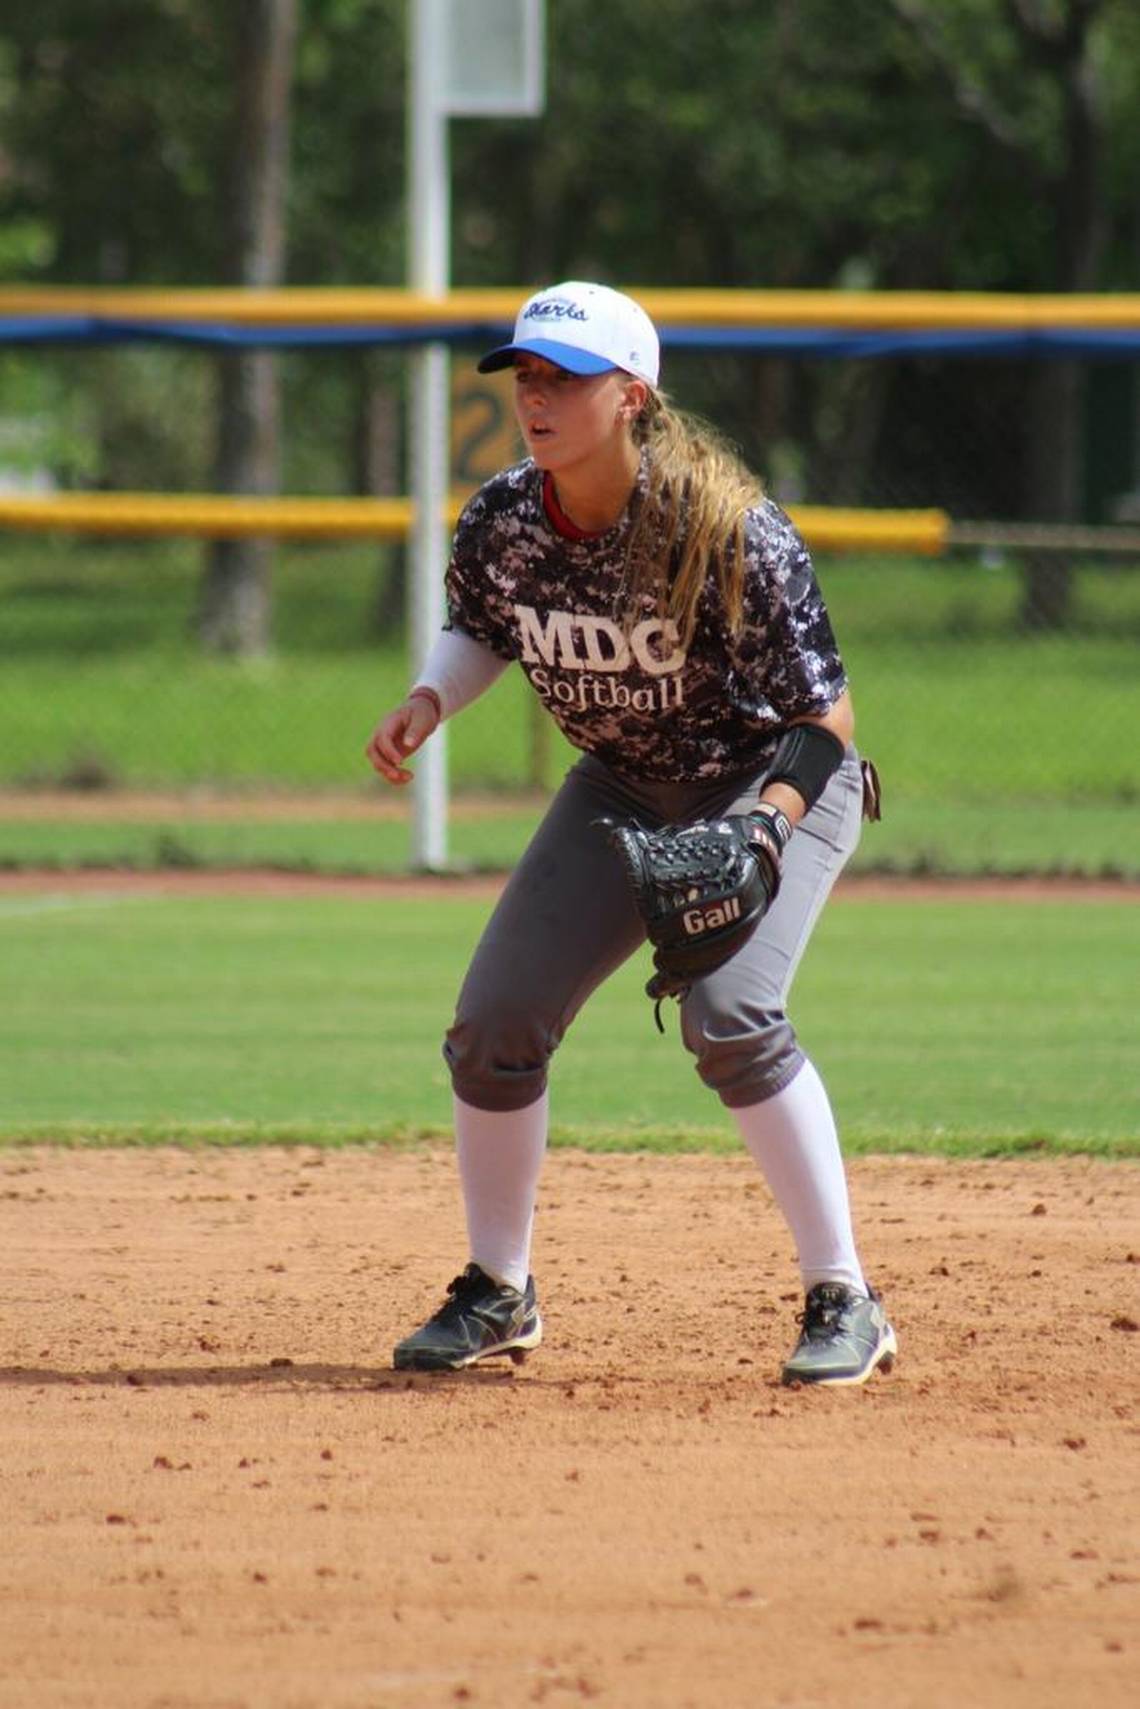 Female Miami Dade College softball player gets noticed by MLB ...